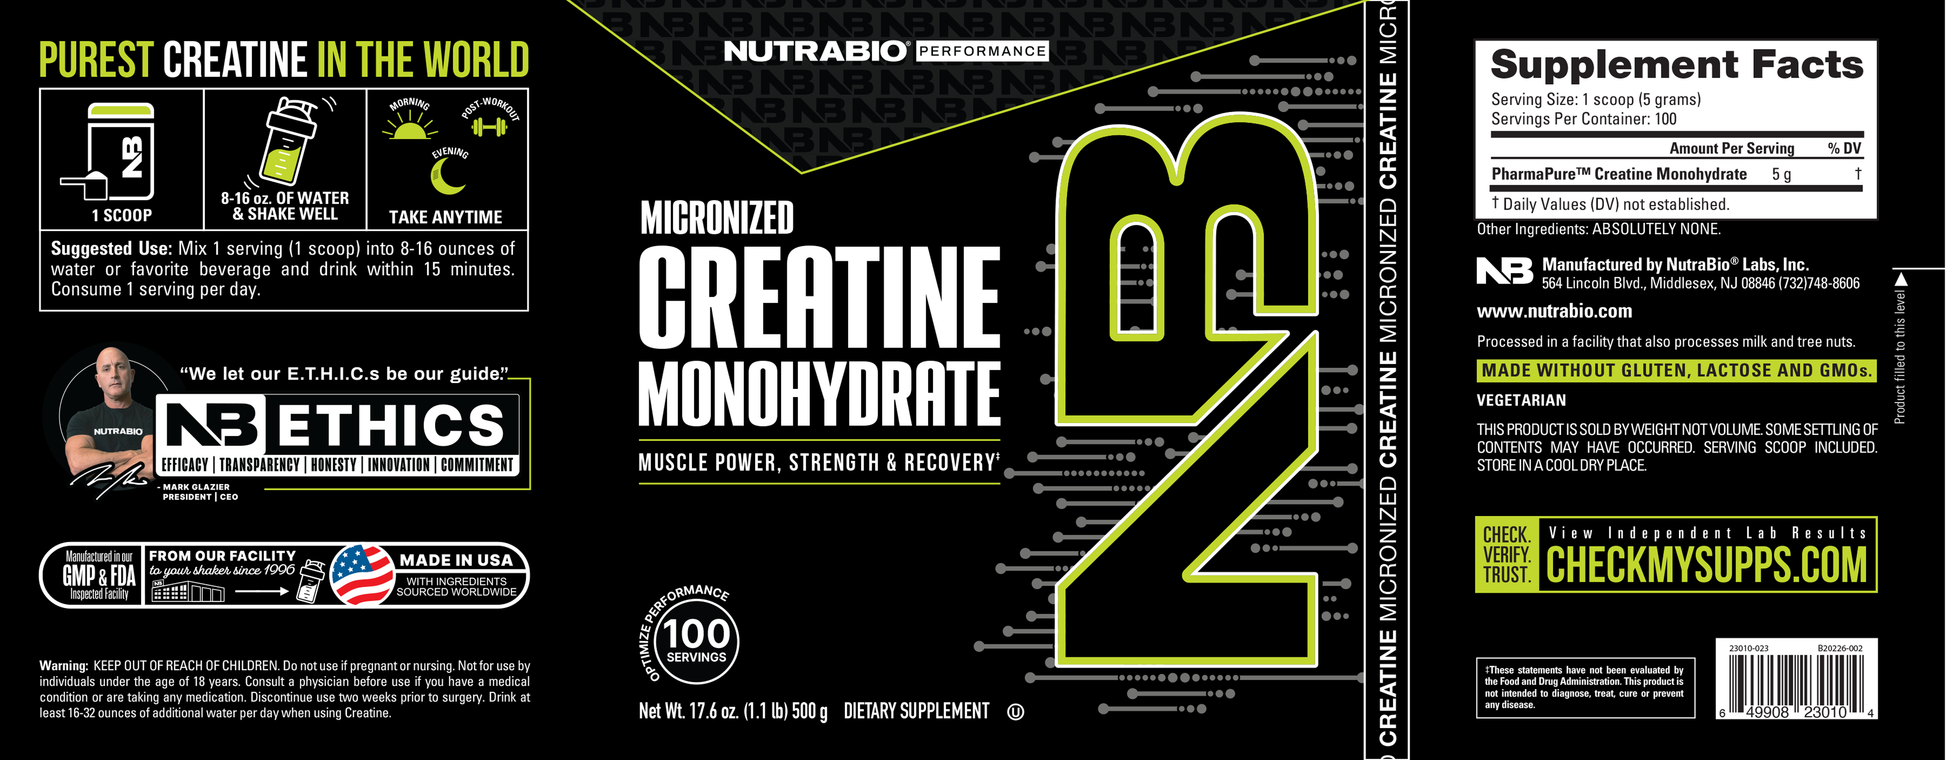 2NS Unflavored Creatine Micronized Powder, 60 Servings – 2nd